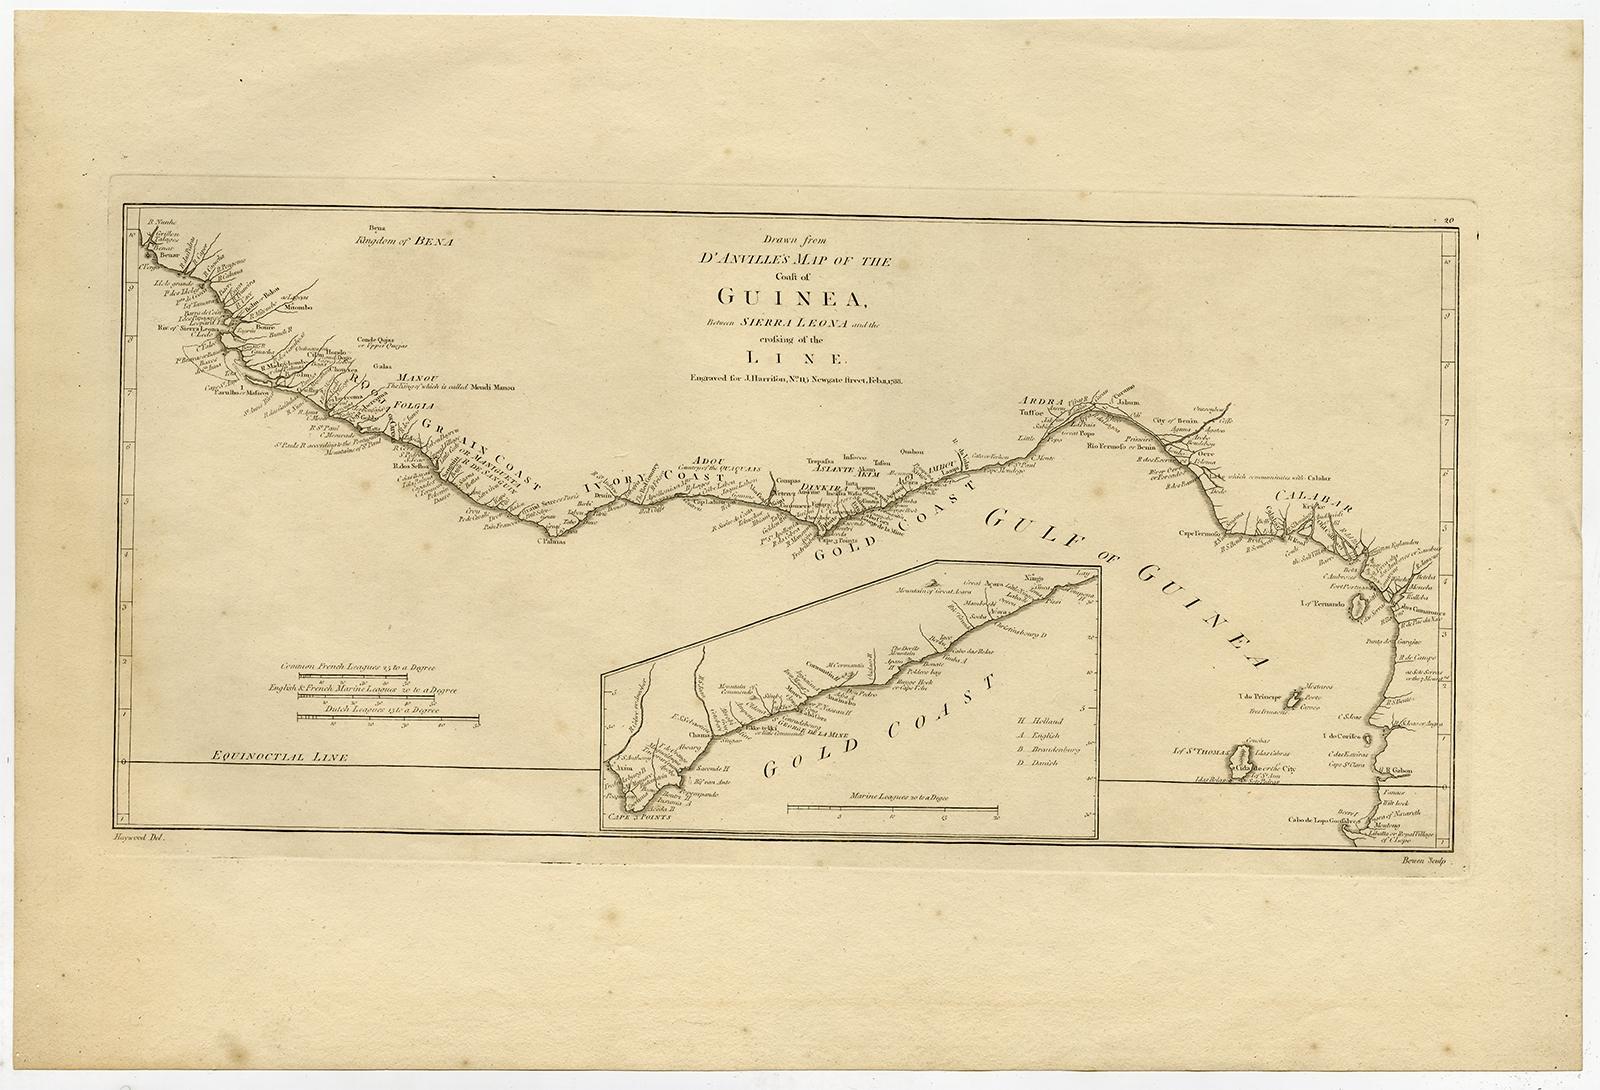 Antique map titled 'Drawn from d'Anvilles Map of the Coast of Guinea, Between Sierra Leone and the crossing of the Line.' 

Map of the African coast, Gulf of Guinea, from Sierra Leone to Gabon (this includes Liberia, Ivory Coast, Ghana, Togo,